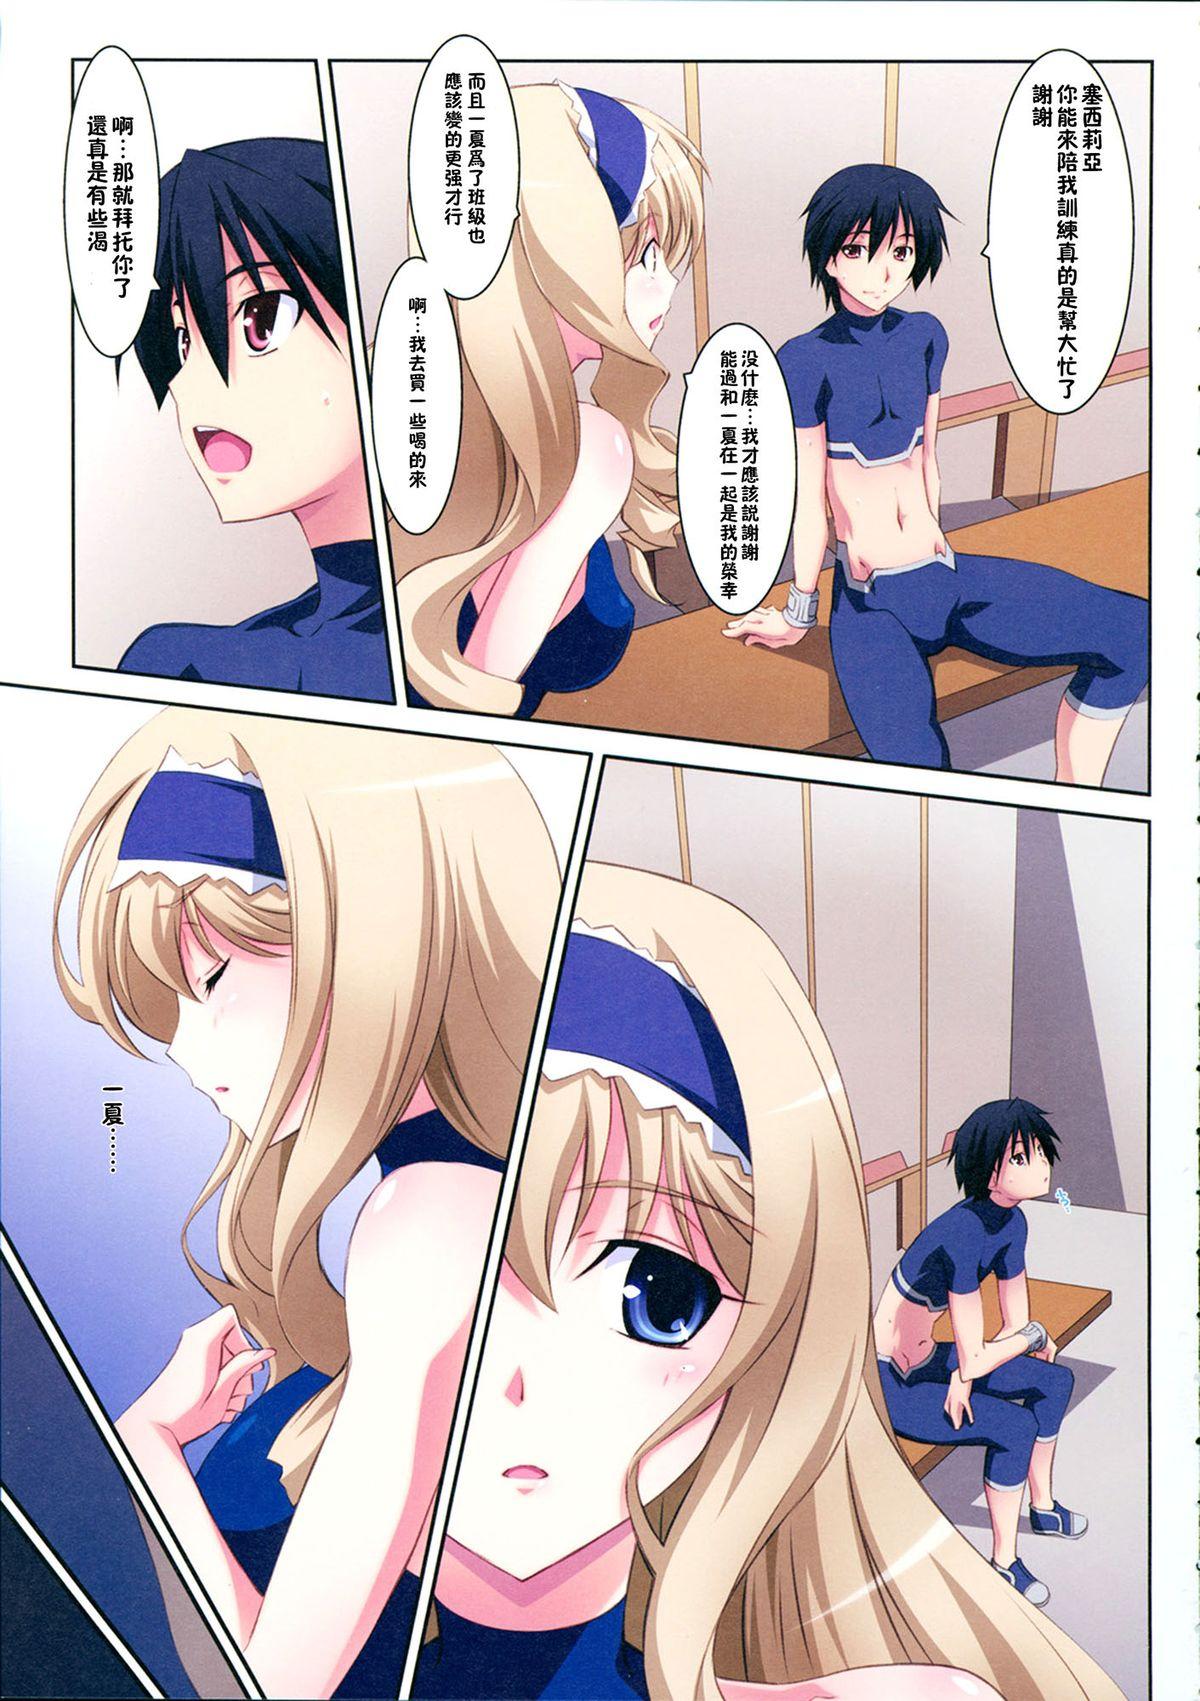 Strip Cecilia Style - Infinite stratos Onlyfans - Page 6